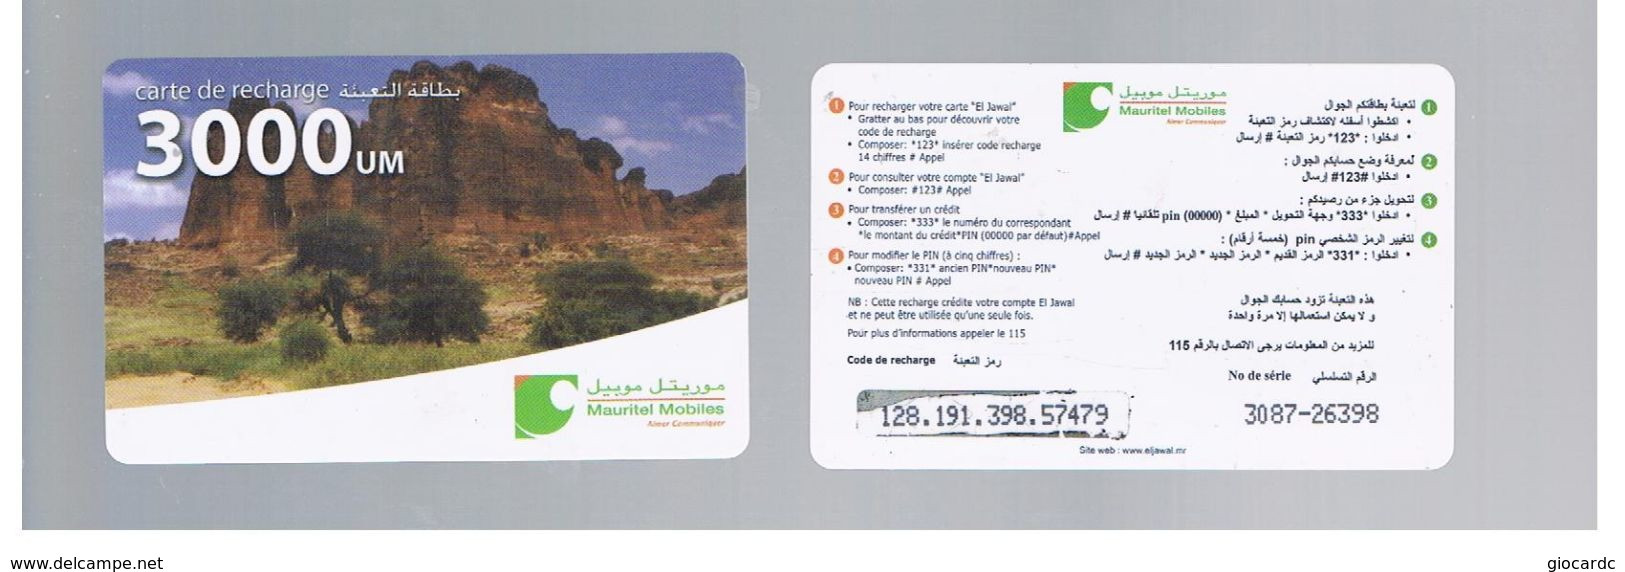 MAURITANIA   - MAURITEL MOBILES (GSM RECHARGE) - MOUNTAINS AND TREES  3000      - USED  -  RIF. 9166 - Mountains